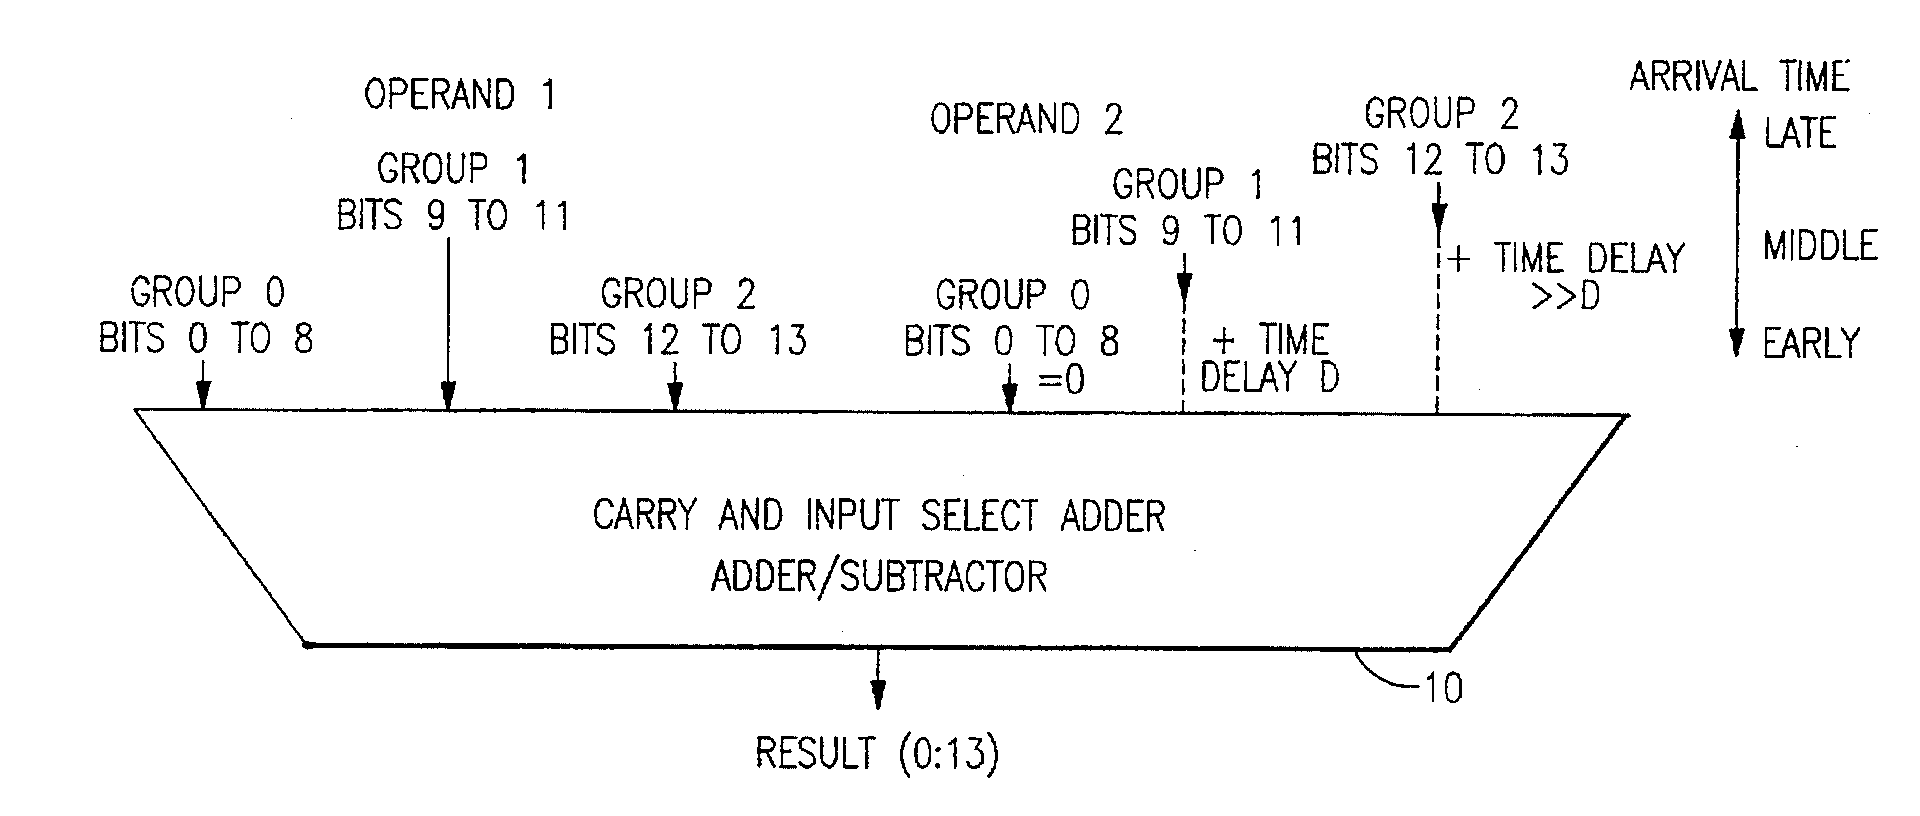 us5654911(a)_carry select and input select adder